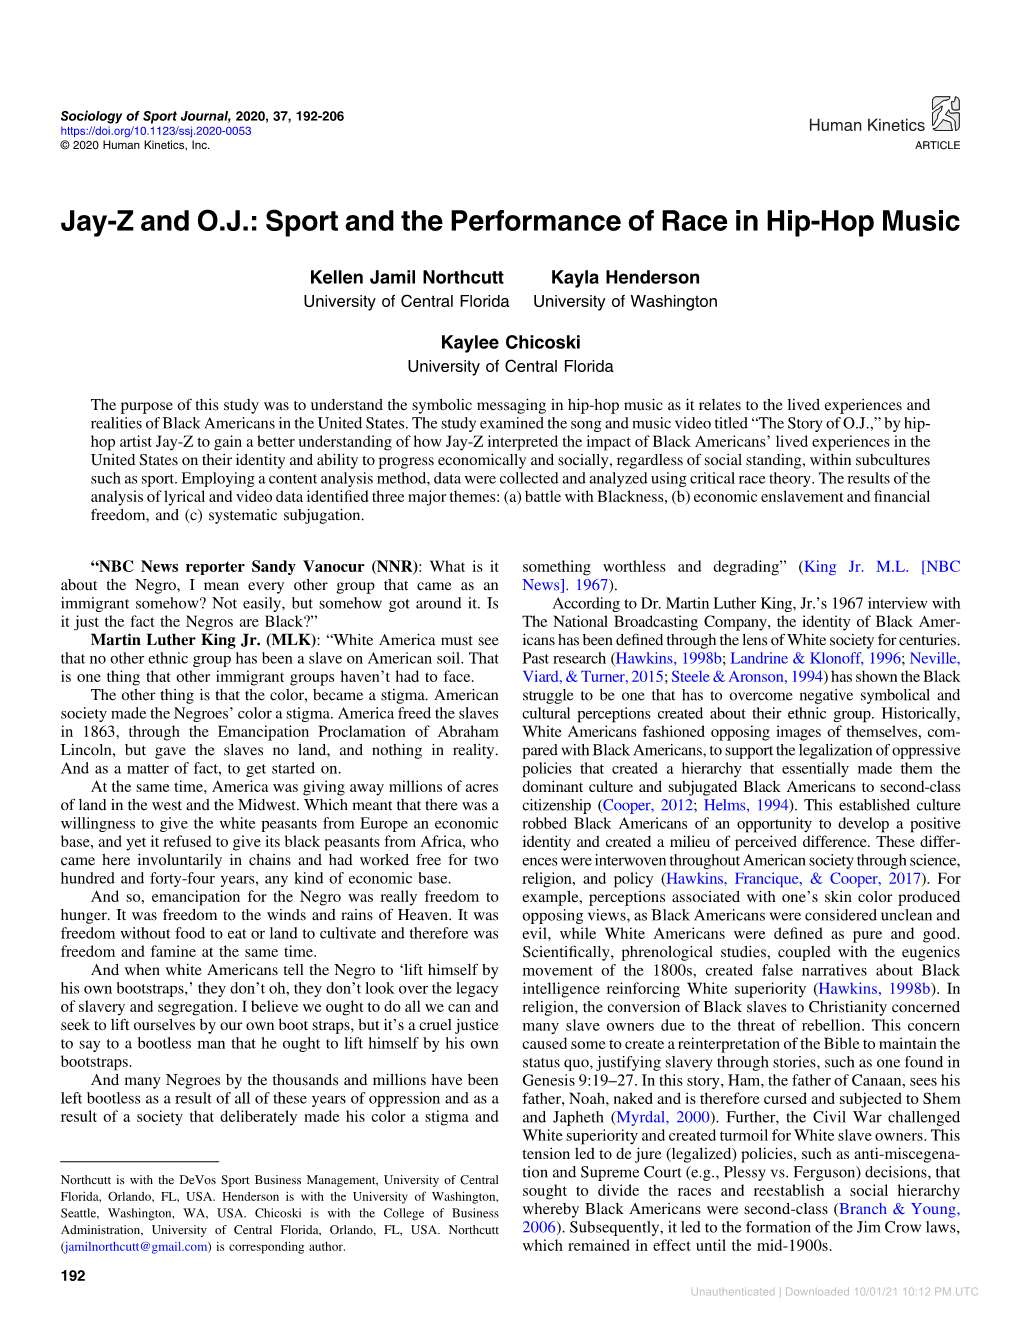 Jay-Z and O.J.: Sport and the Performance of Race in Hip-Hop Music